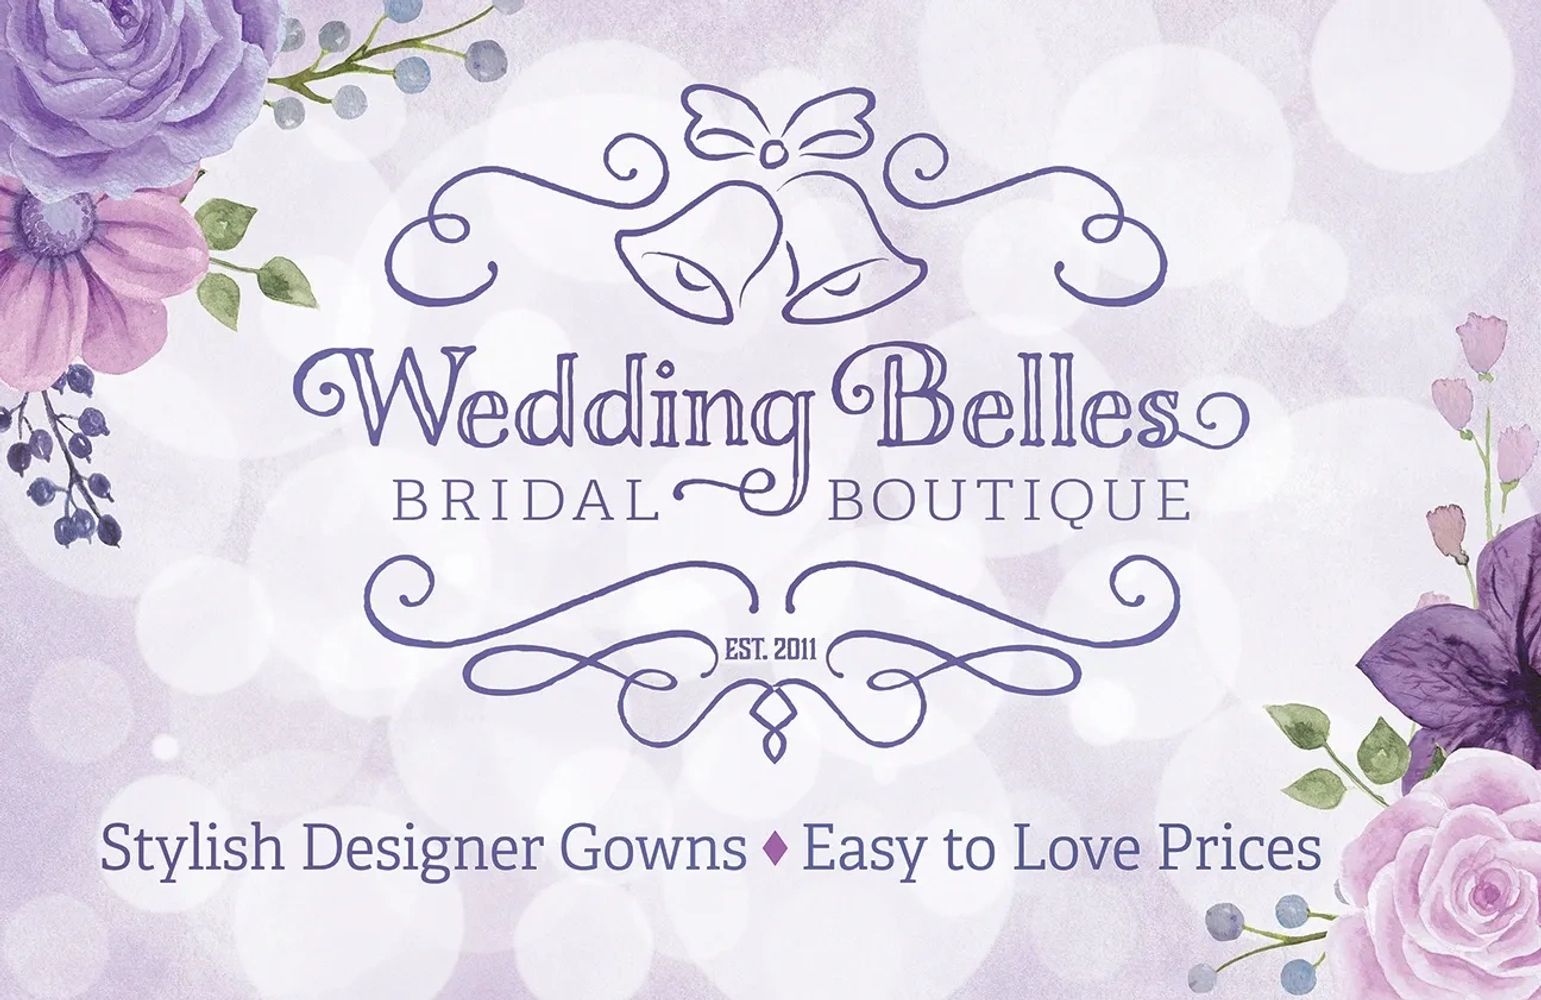 Wedding Belles Bridal Boutique located in Gilbert, Arizona is an affordable designer dress shop 